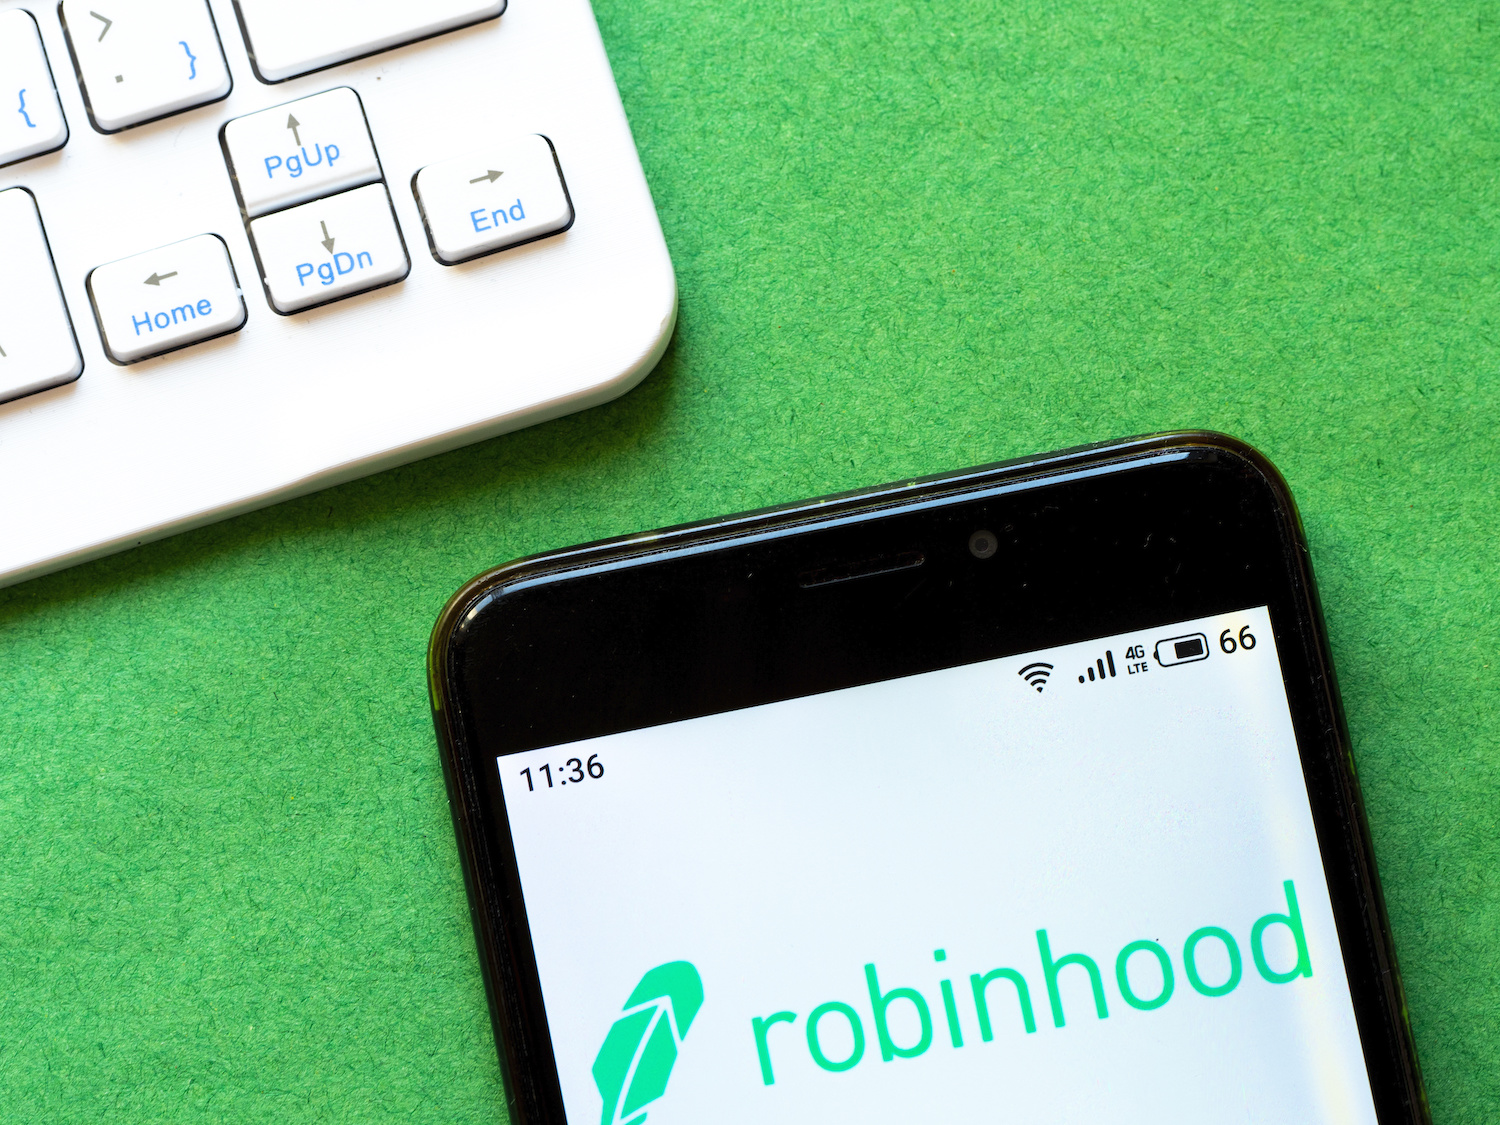 Robinhood CEO Says It Was A 'Correct' Decision To Block GameStop Buys to  'Protect Investors' - BroBible